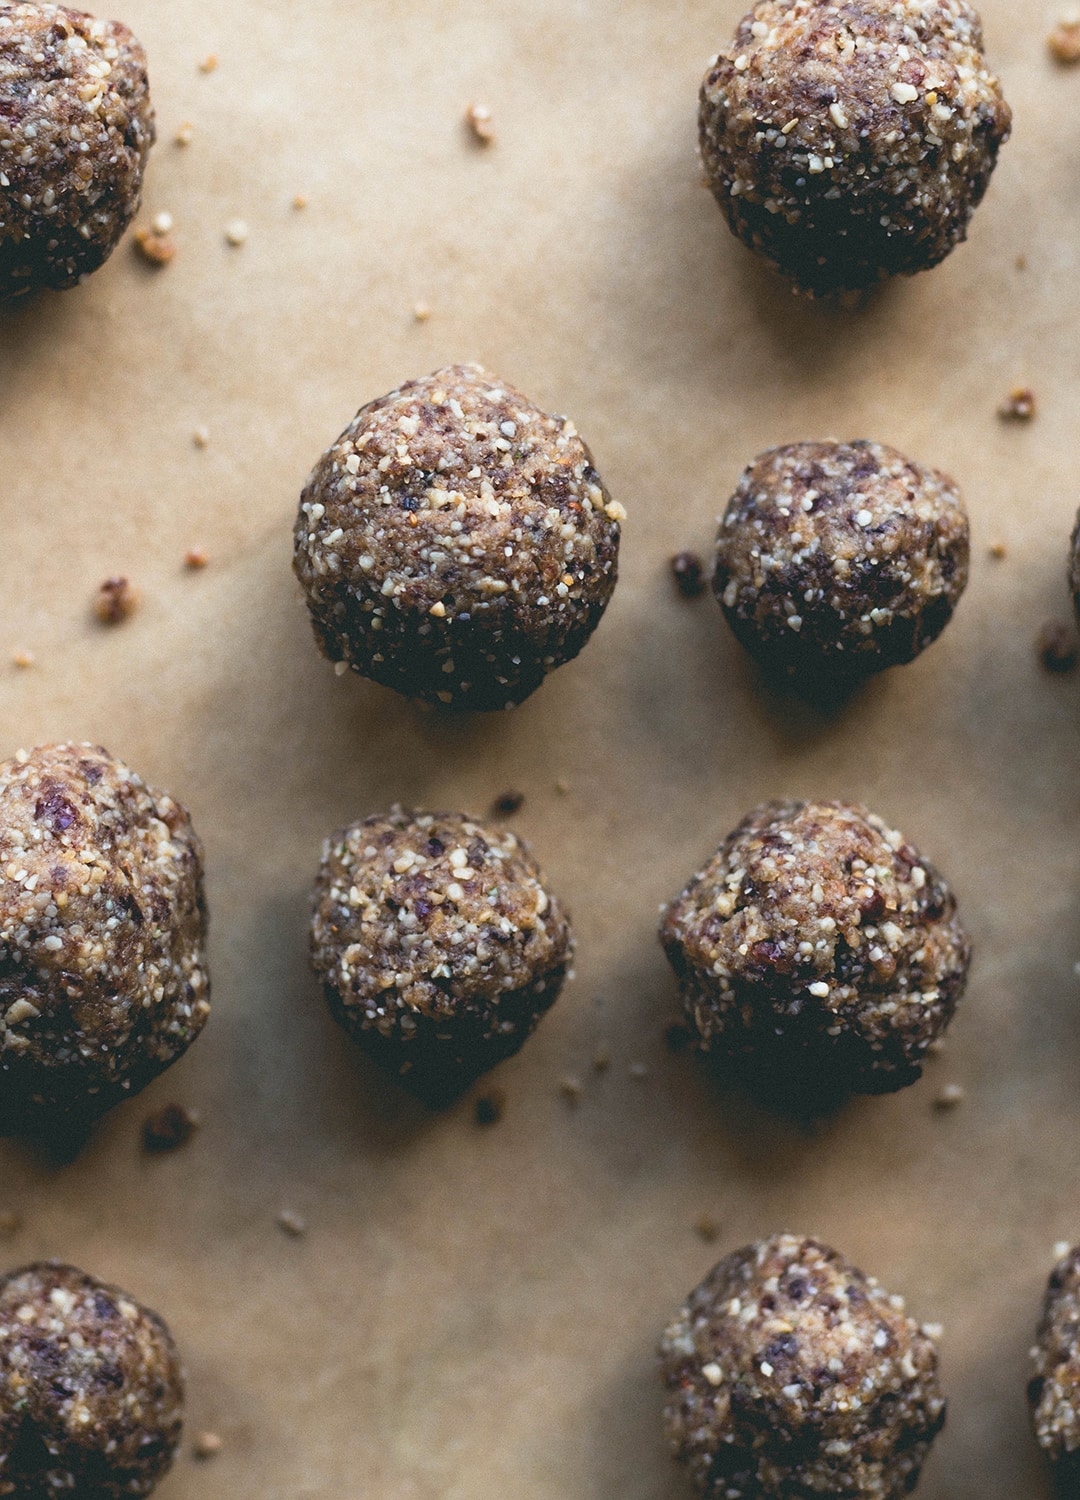 Cranberry Maca Baobab Energy Bites (raw vegan) - these energy balls are PACKED with superfoods and nutrients! Sweet, tangy, and delicious! | thehealthfulideas.com